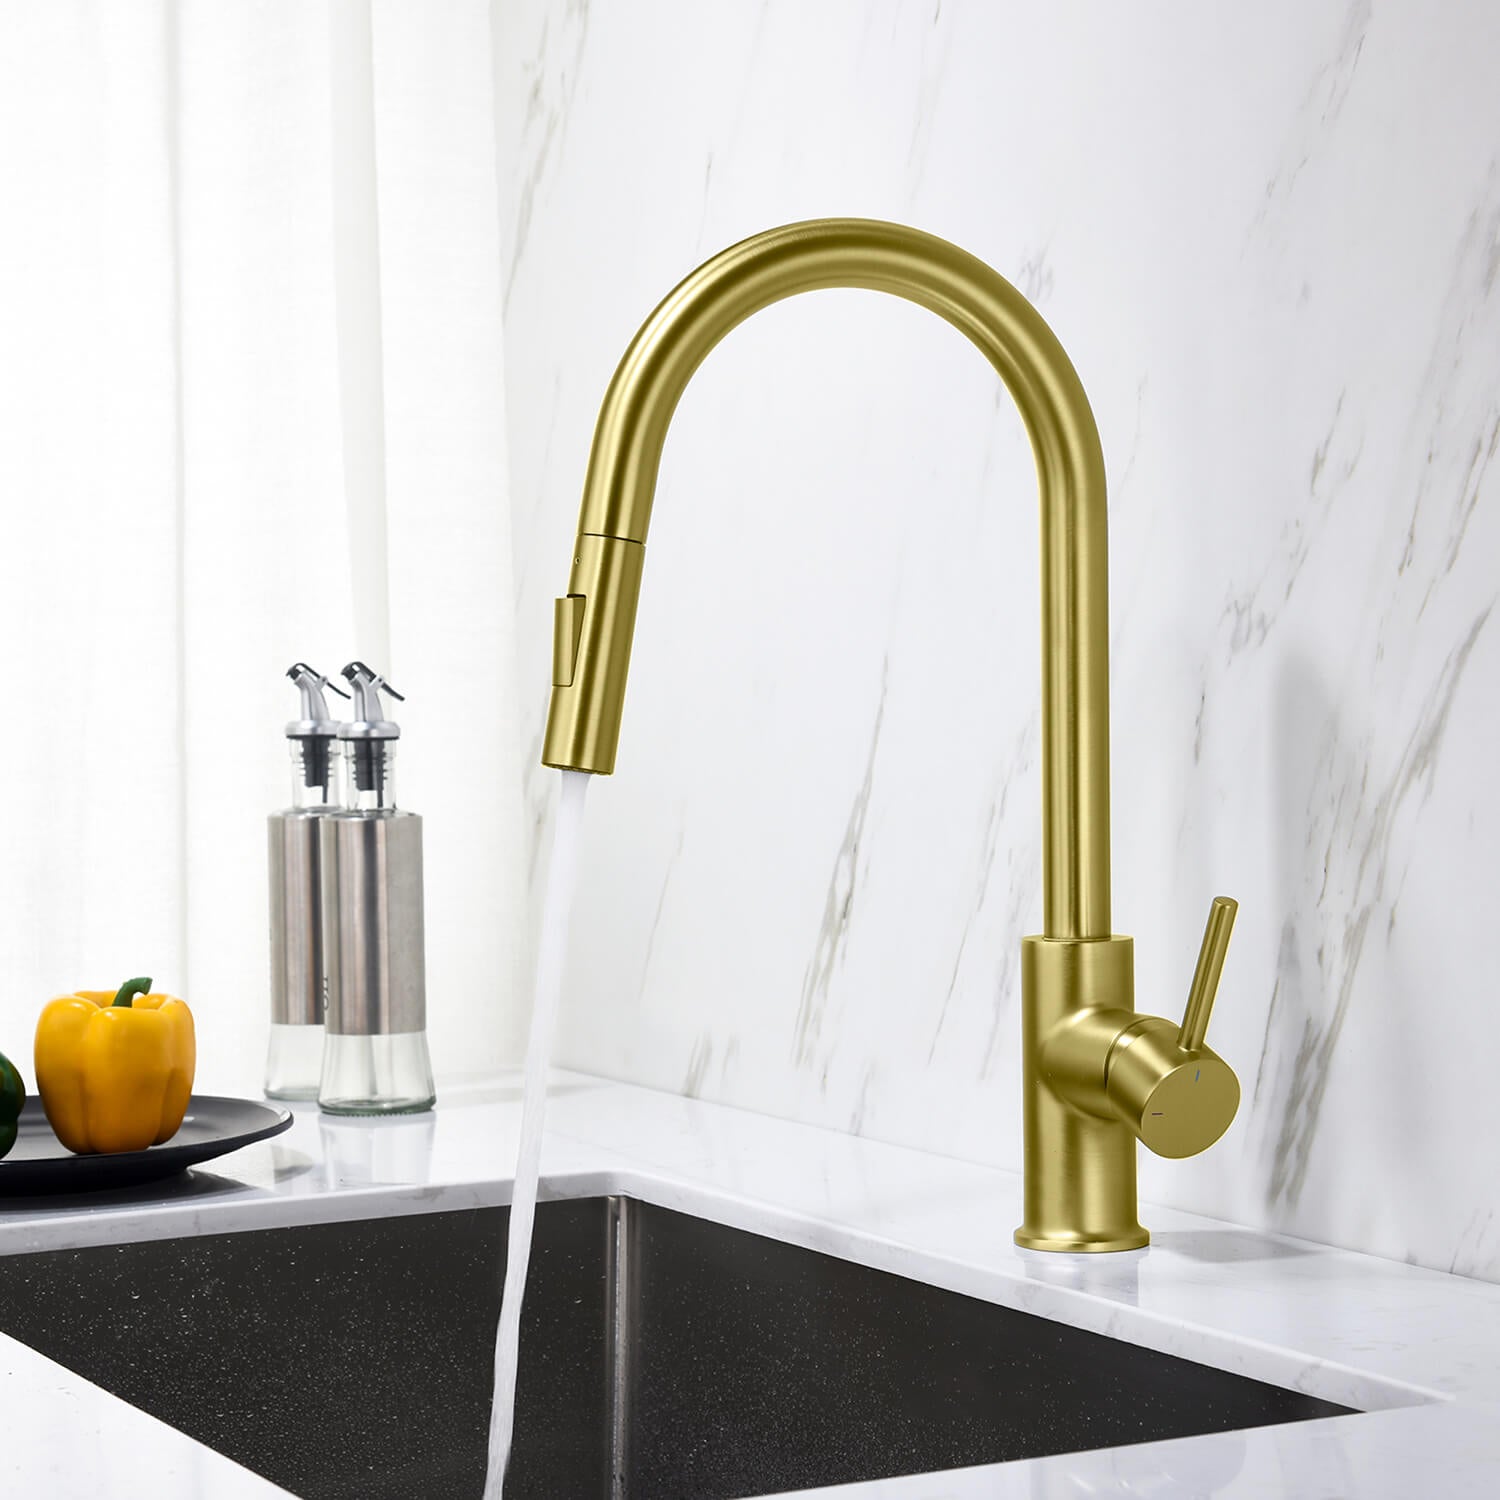 Kibi Circular Single Handle Pull Down Kitchen Faucet With Soap Dispenser in Brushed Gold Finish